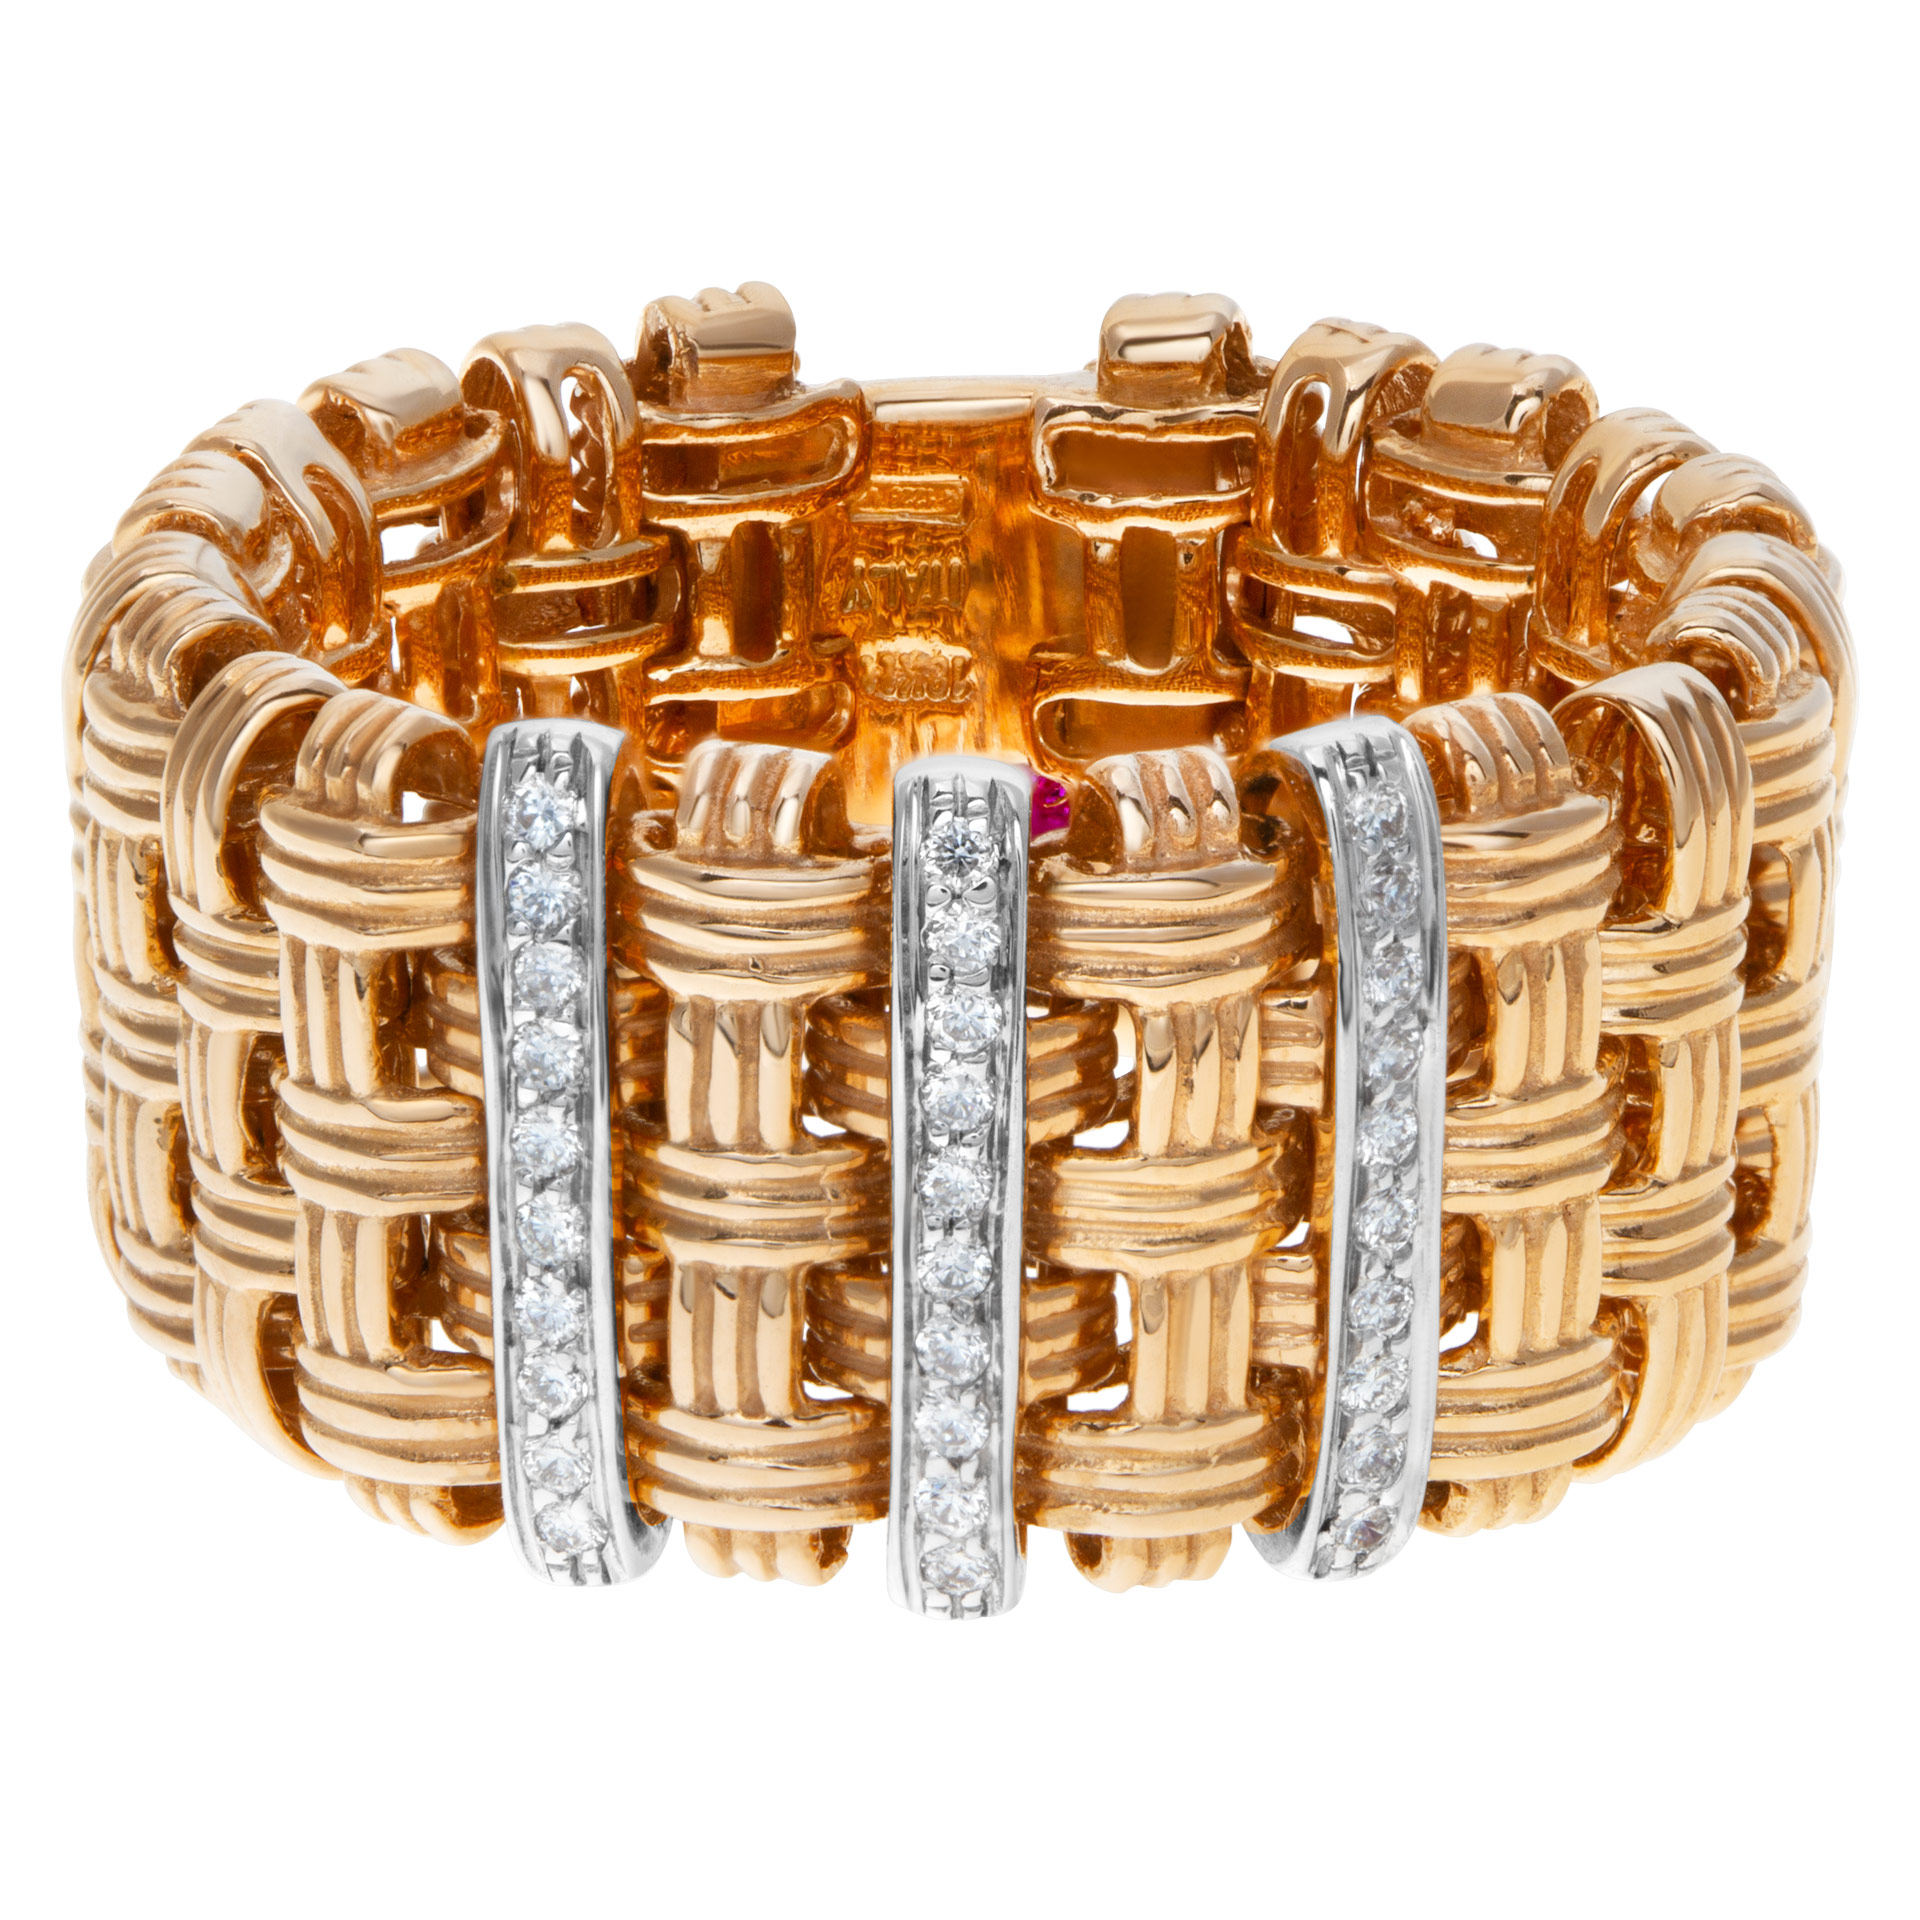 sell roberto coin jewelry like this golden gate bracelet!